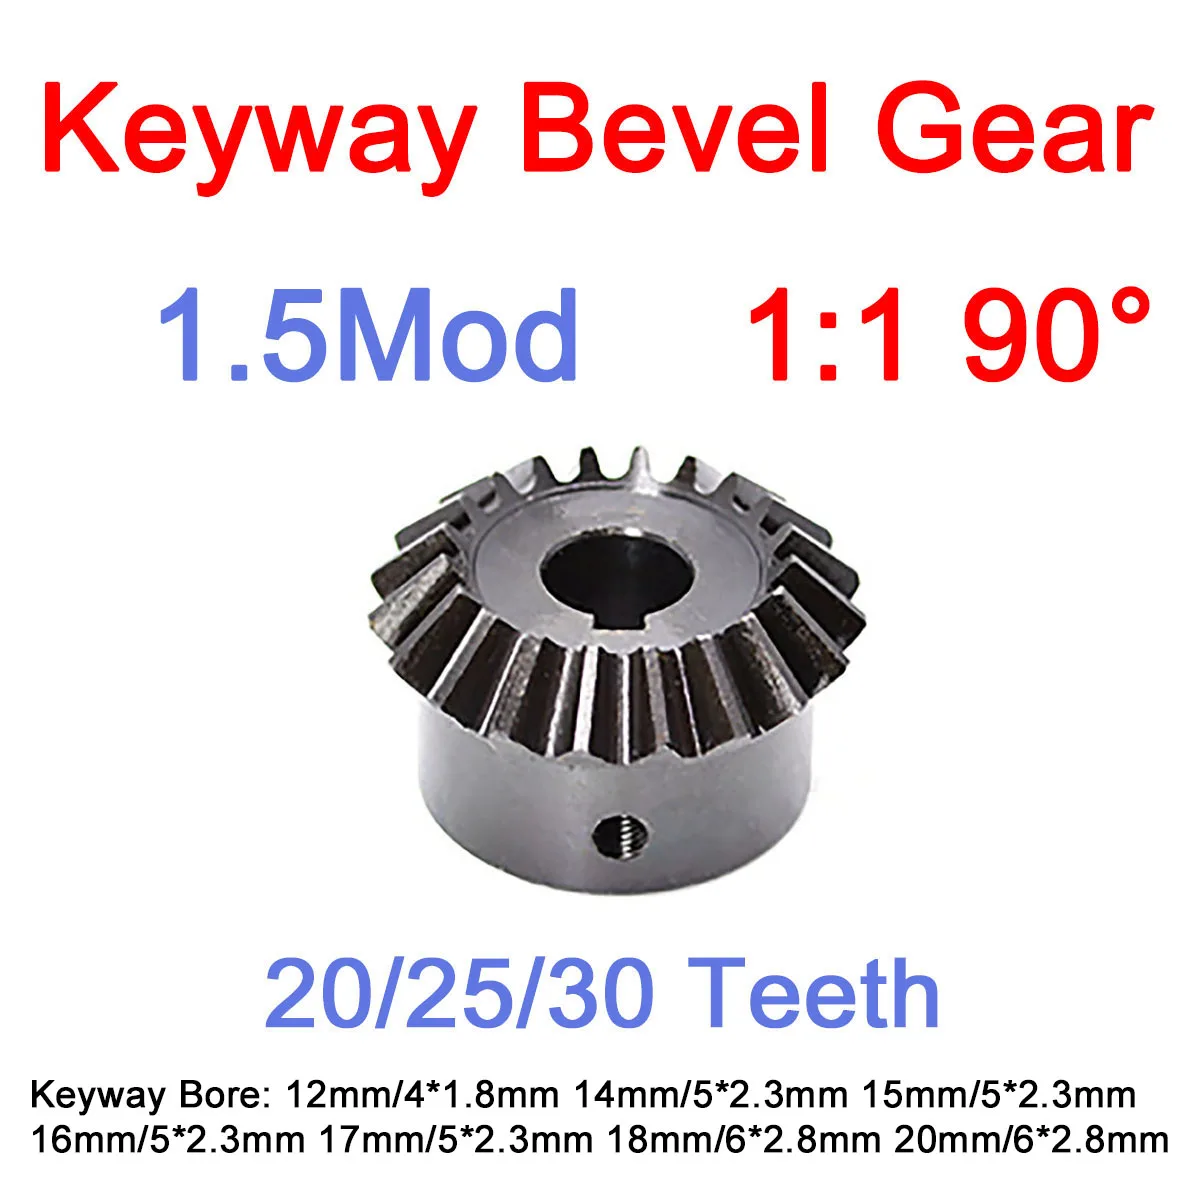 

1Pc 1.5Mod 20/25/30 Tooth Keyway Straight Bevel Gear 90° Speed Ratio 1:1 Carbon Steel Bore 12/14/15/16/17/18/20mm Top Thread M5